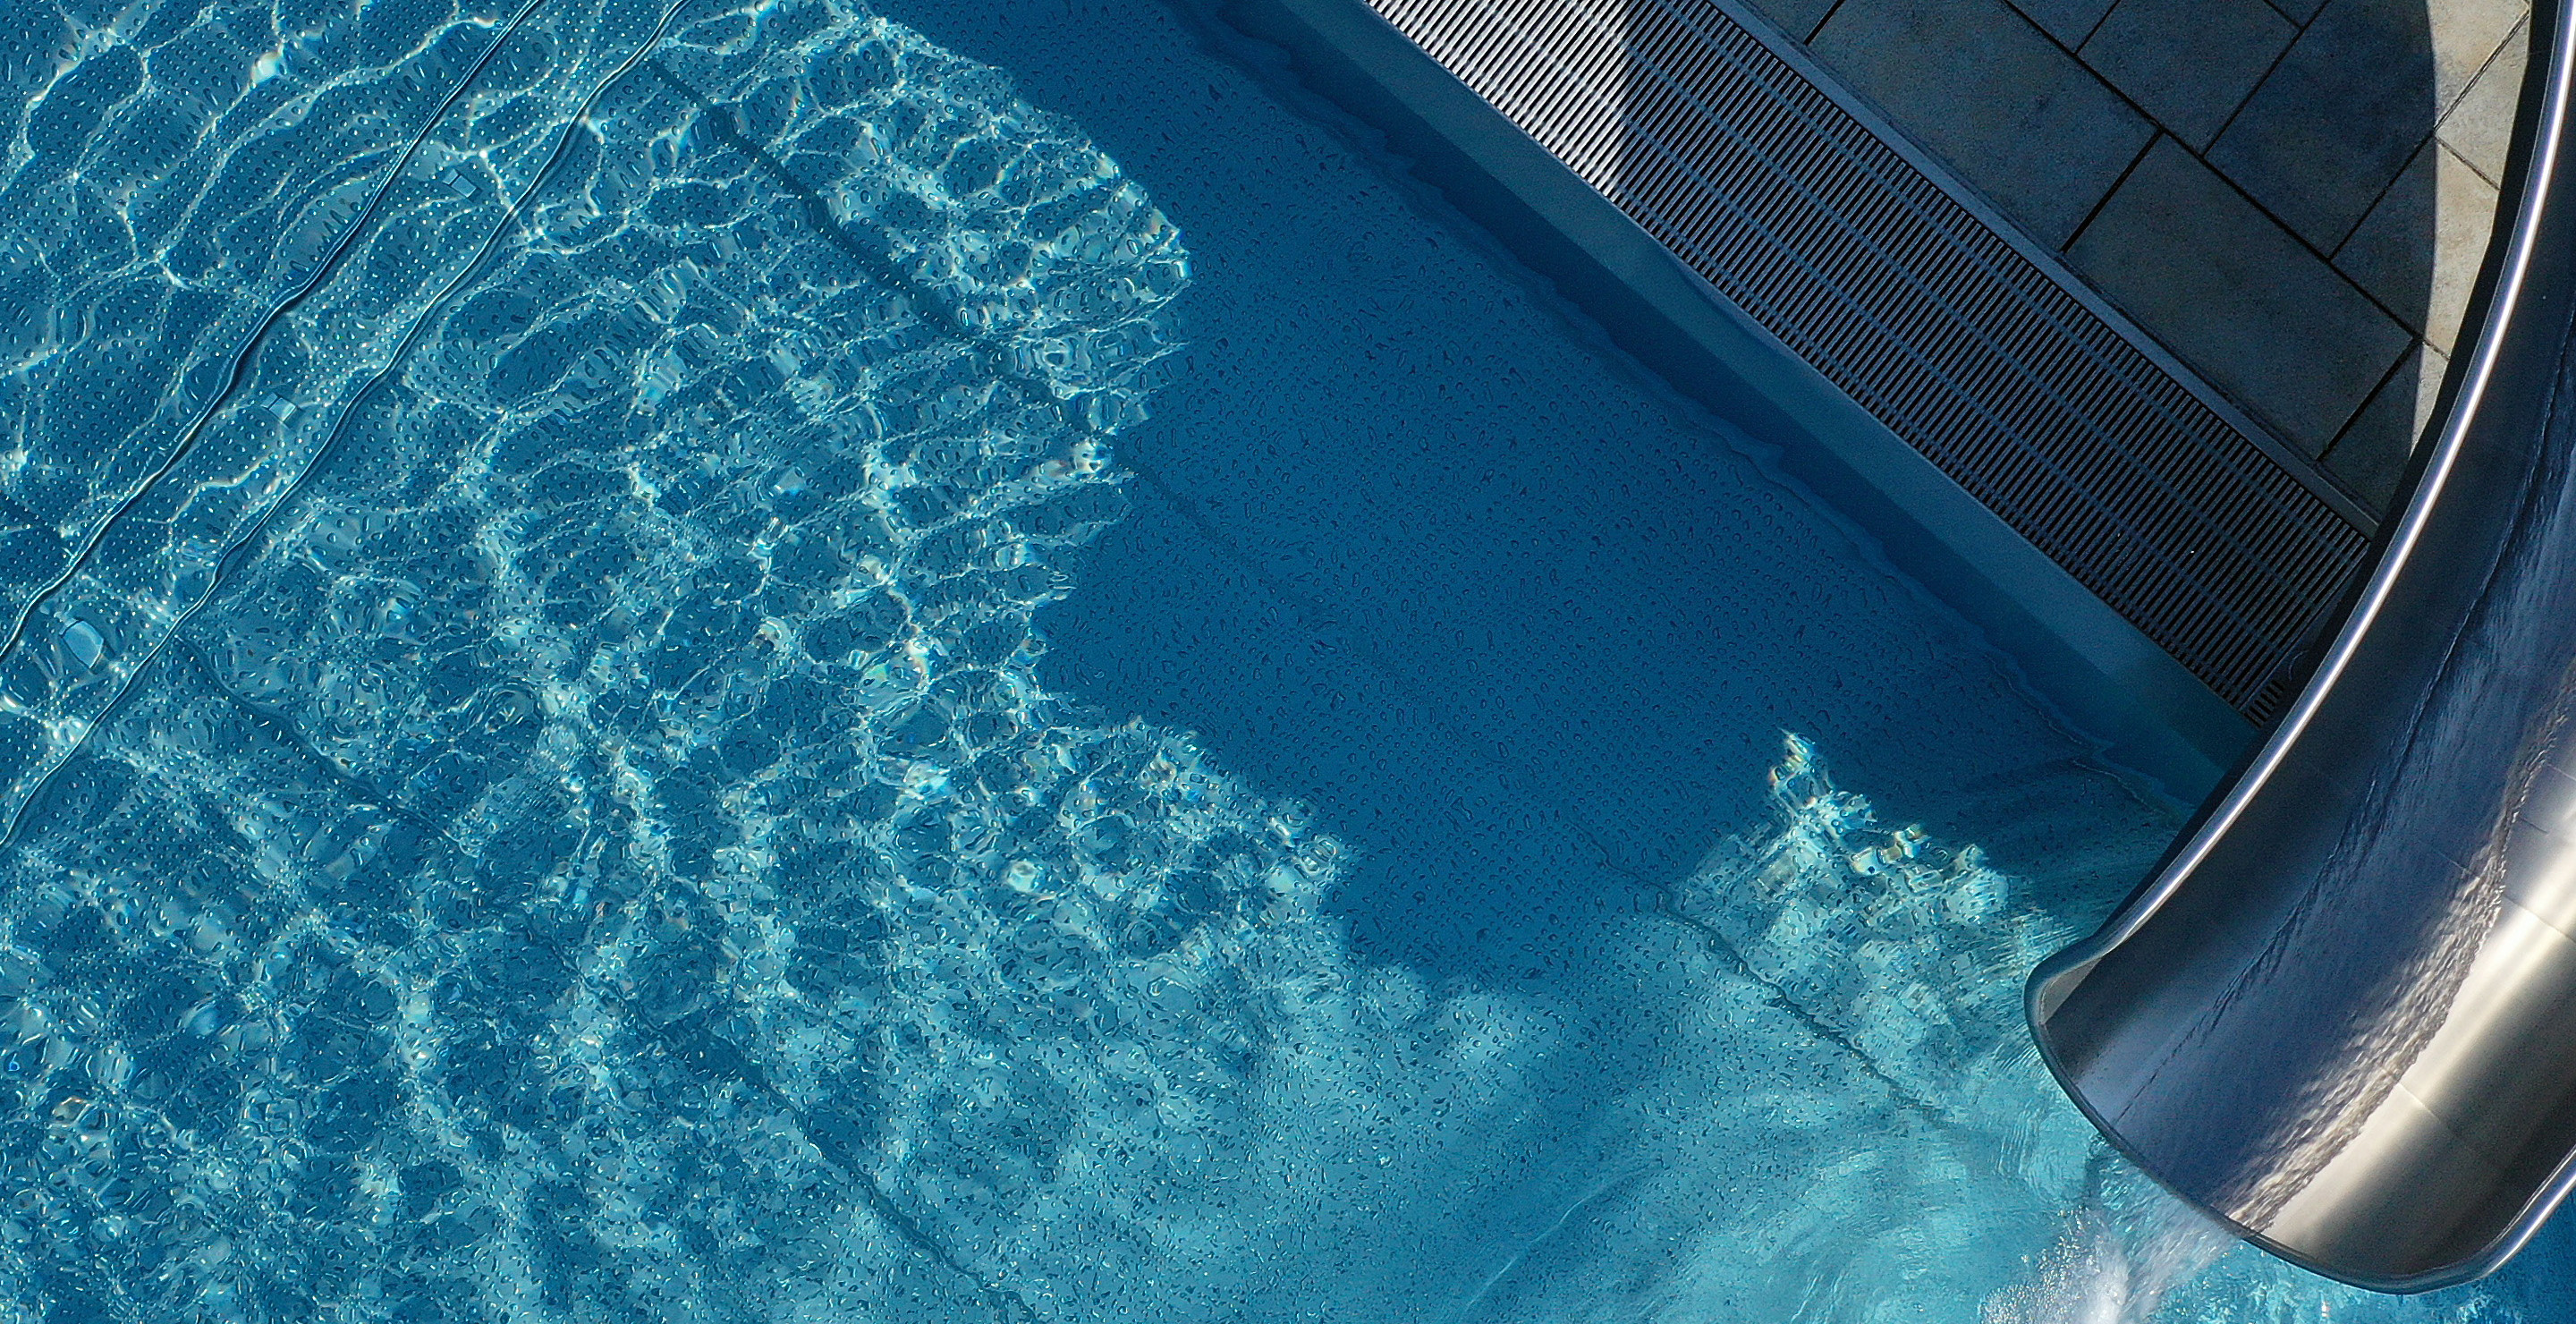 Five People Hospitalized After Accidentally Poisoning Themselves Getting Their Summer Pool Ready